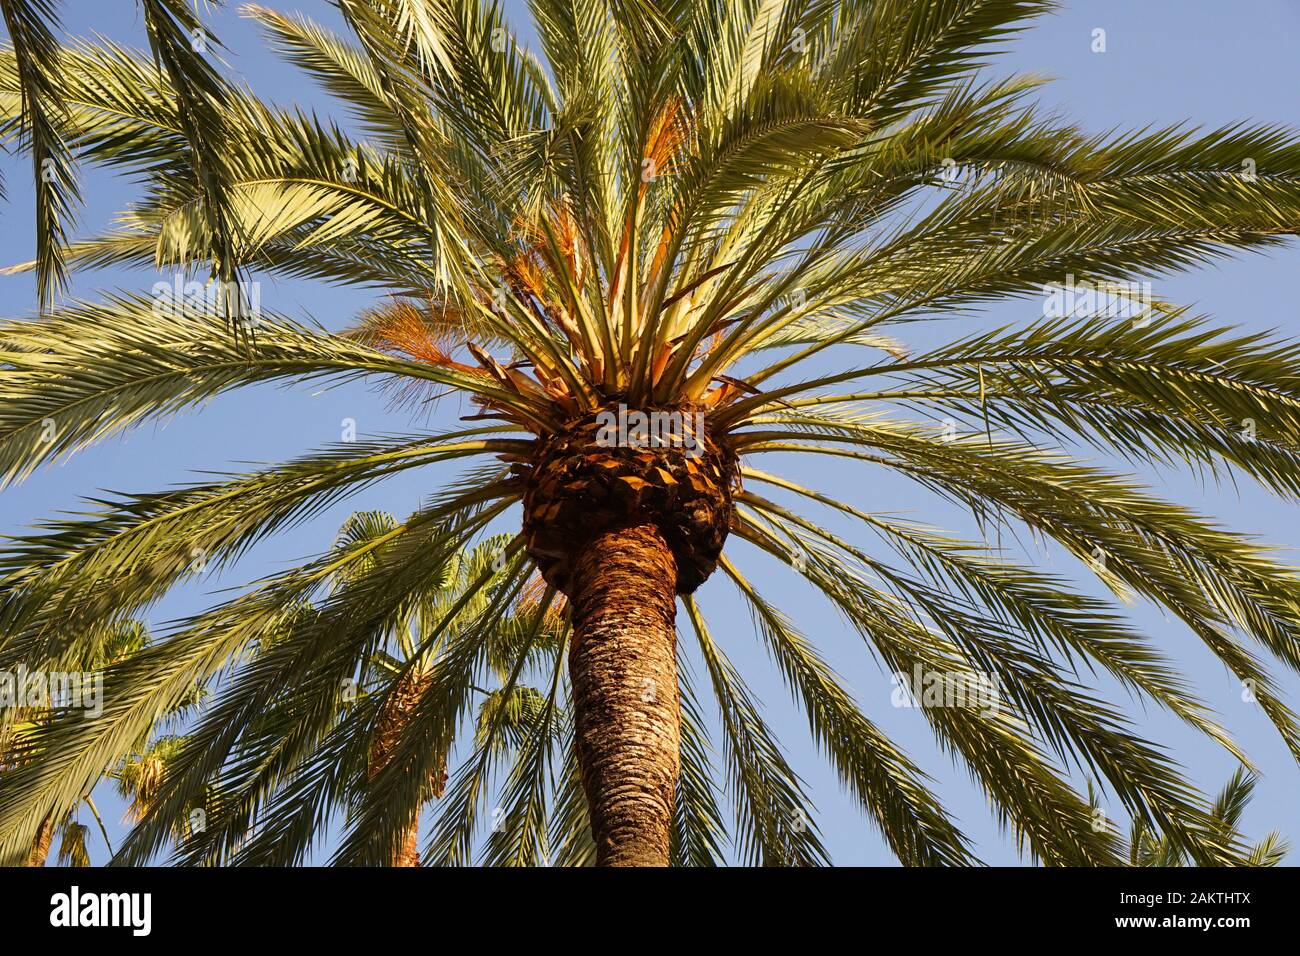 Abstract view of palm trees and leaves against a blue summer sunny sky Stock Photo